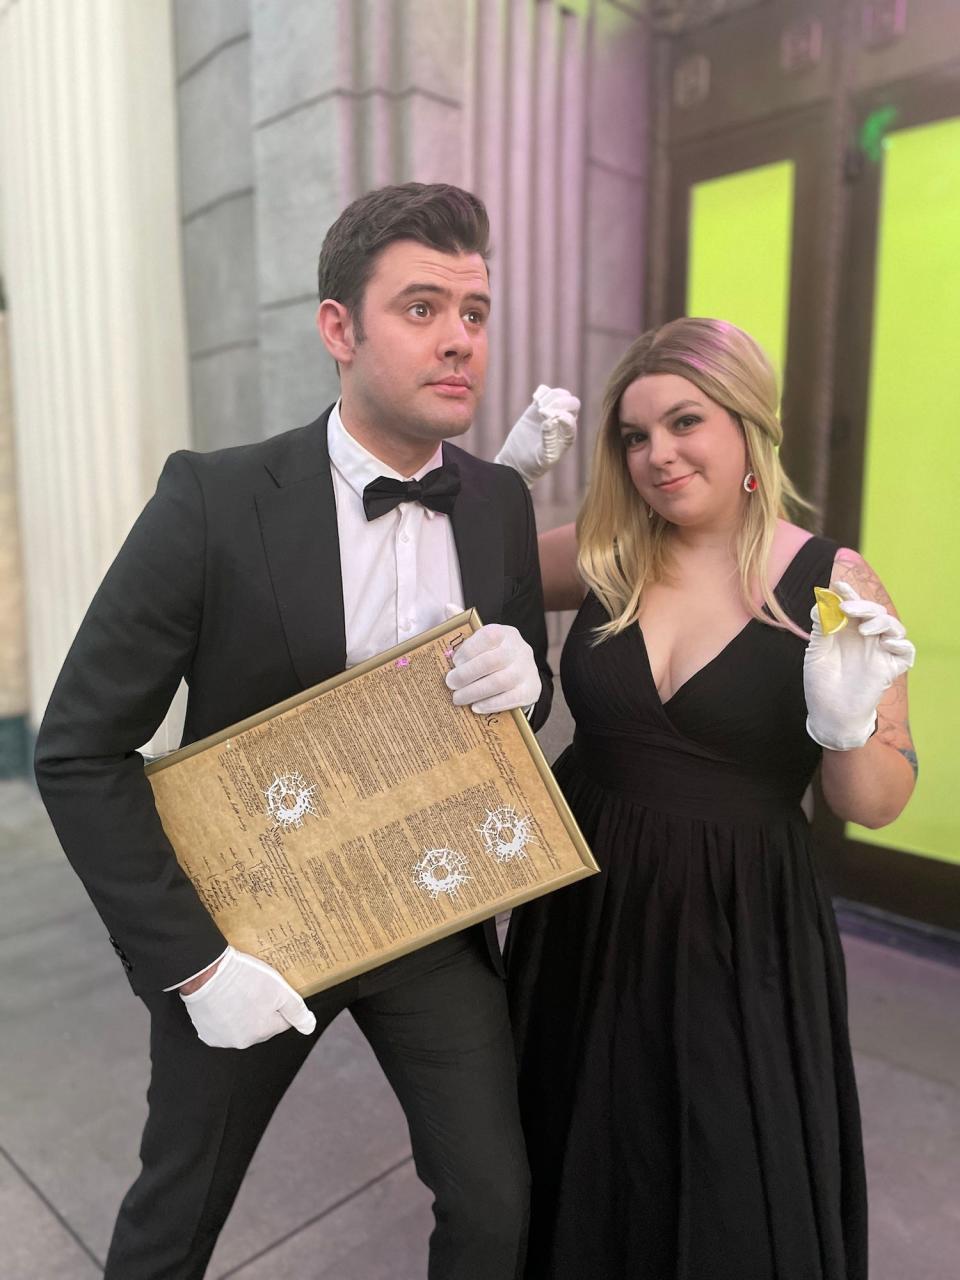 Lizzy Jones and her partner dress as characters from "National Treasure" for Halloween.